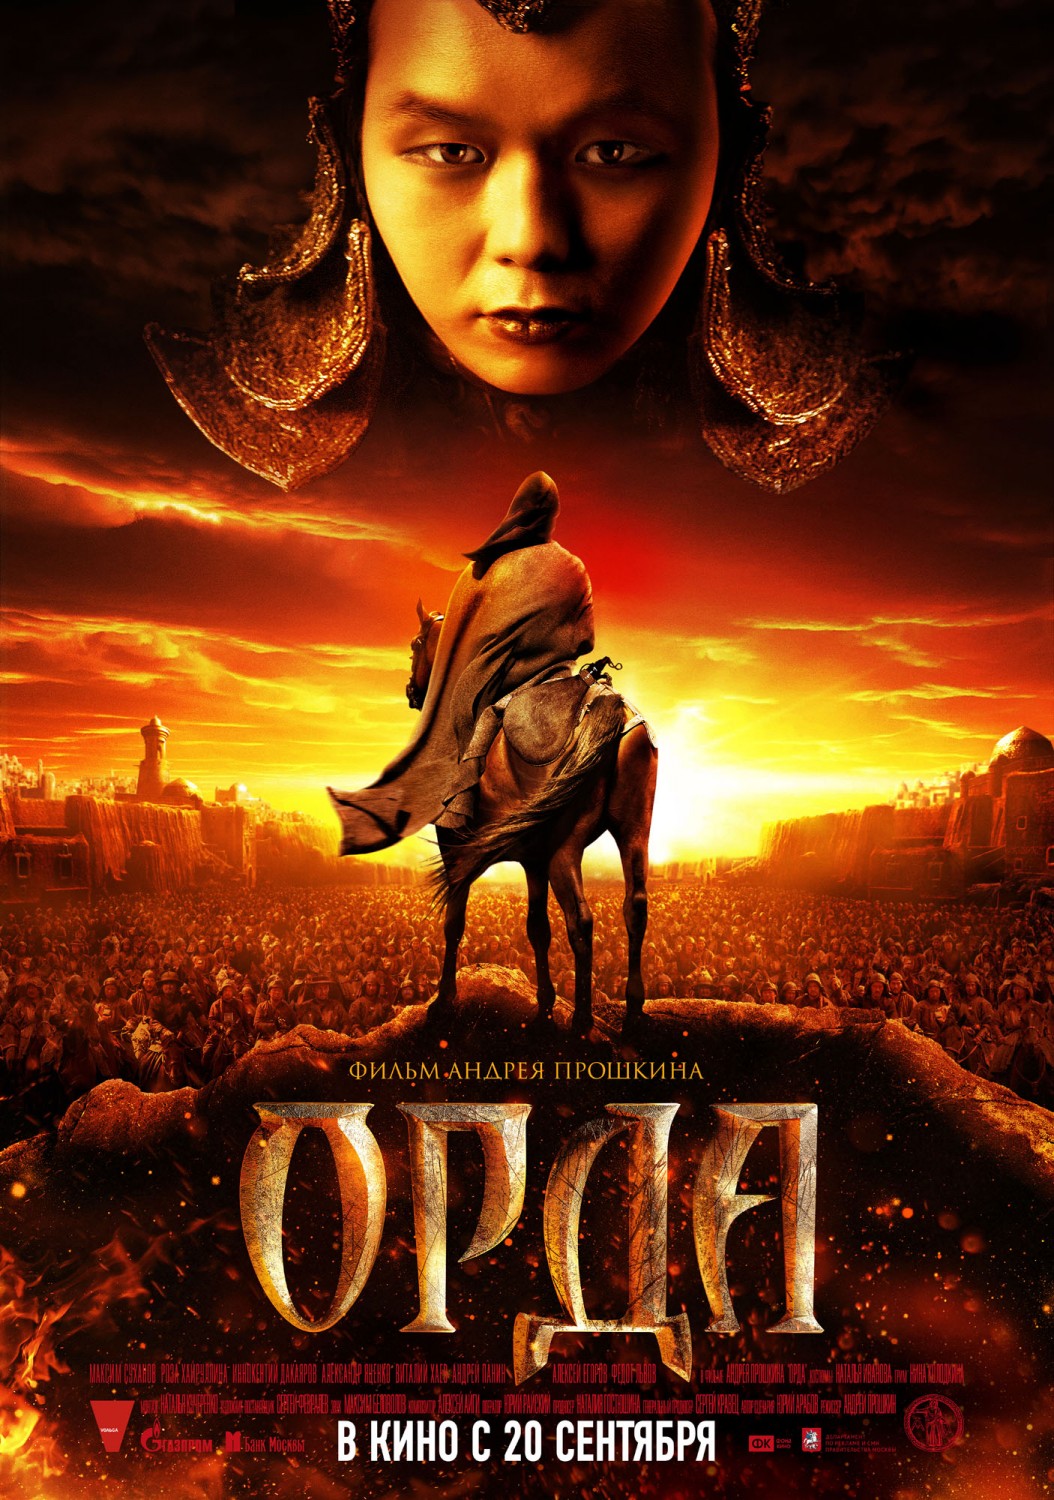 Extra Large Movie Poster Image for Orda (#1 of 6)